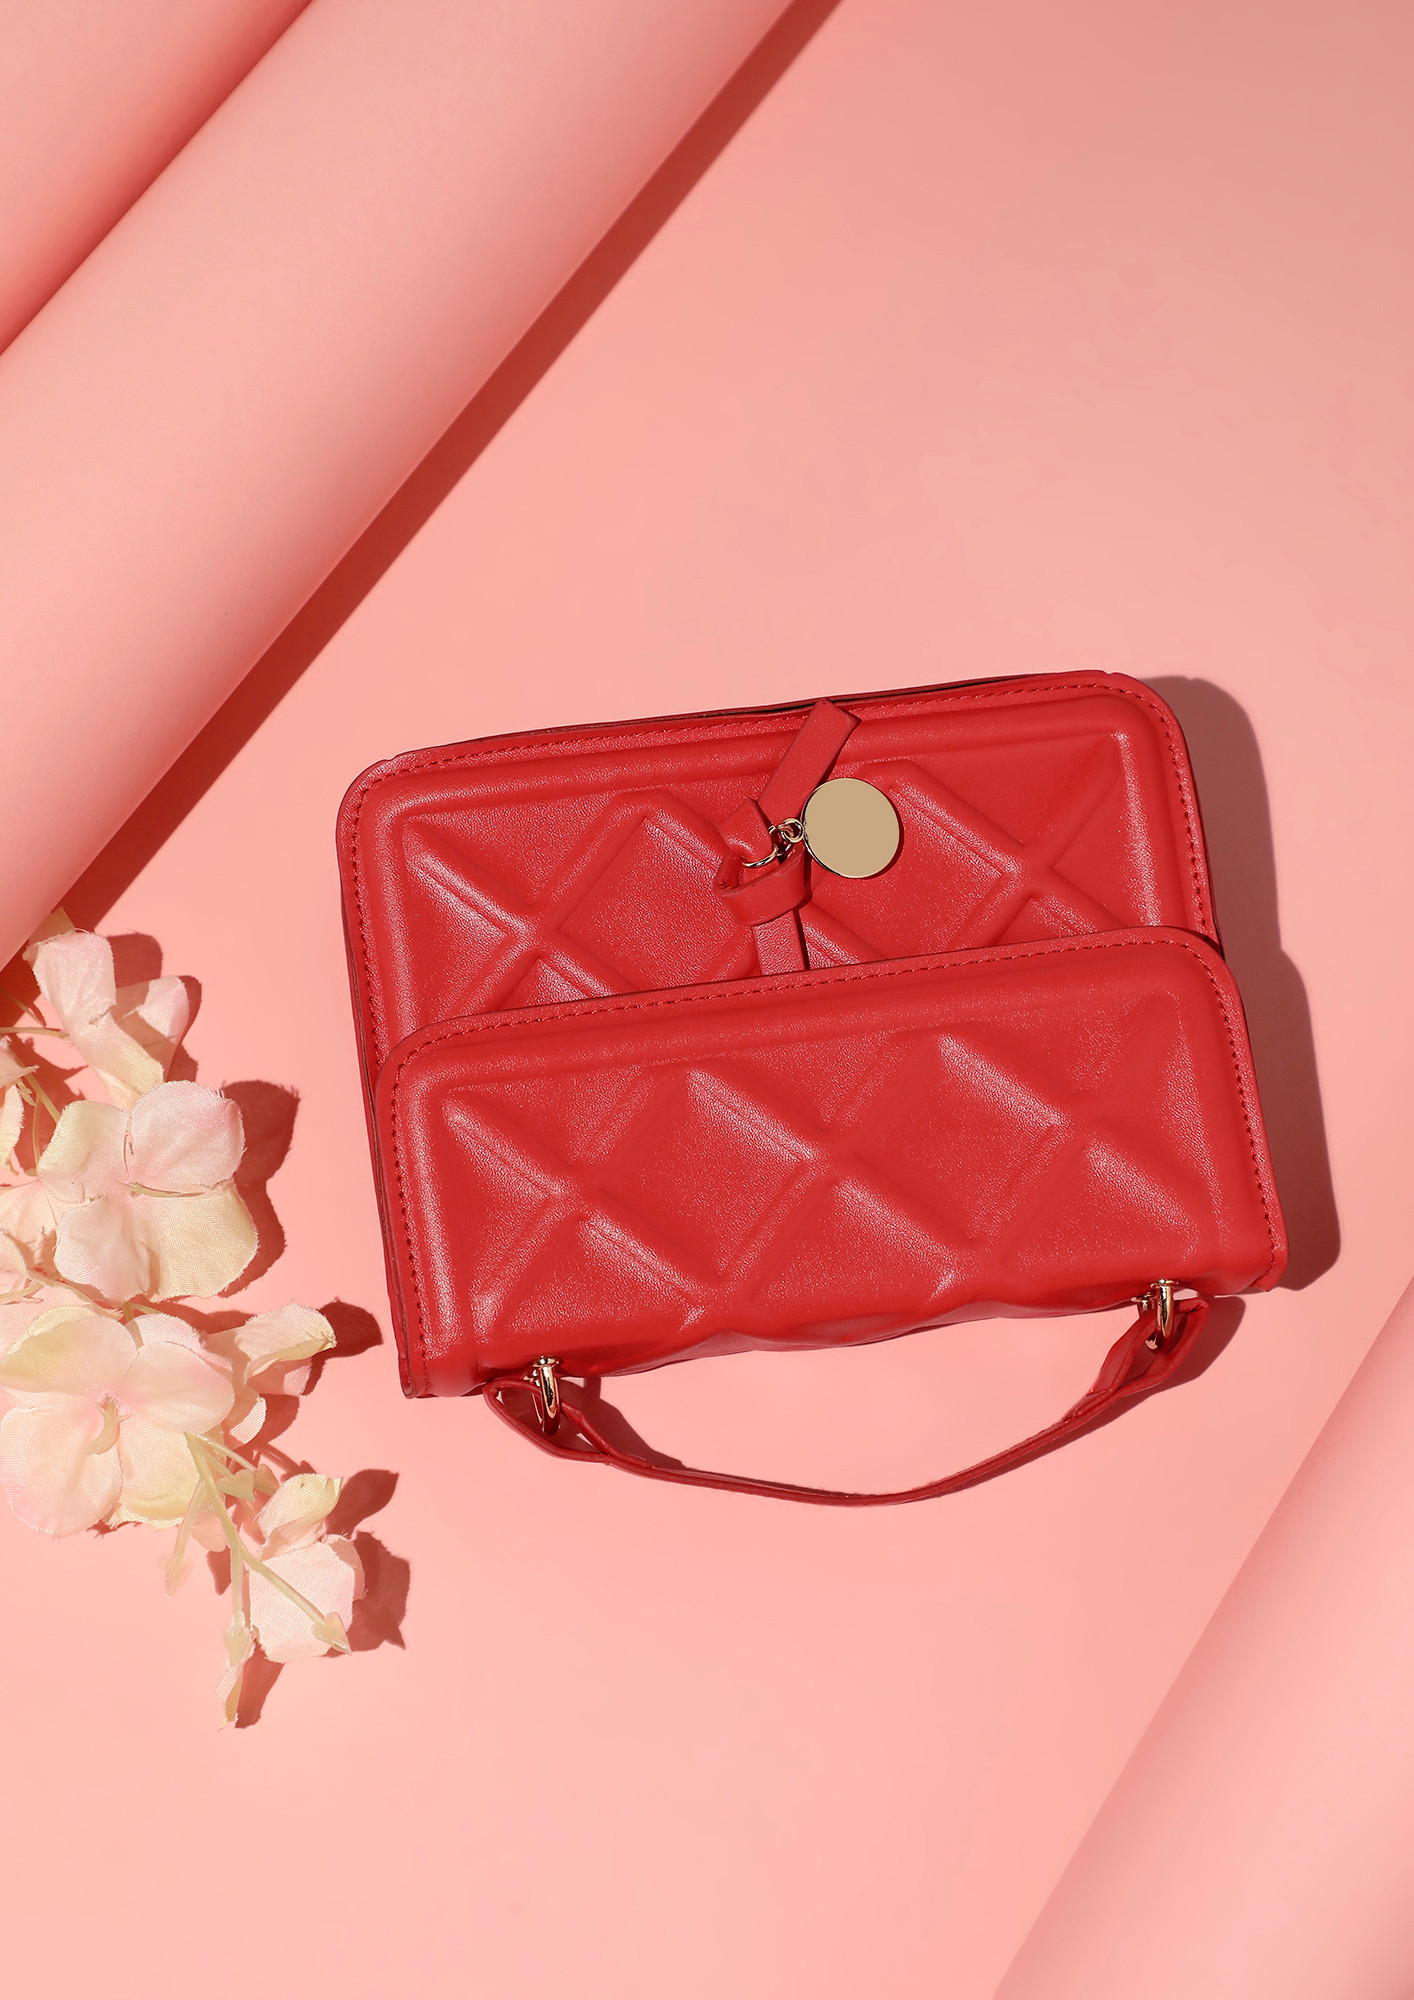 SOLIDS ARE BETTER QUILTED RED HANDBAG